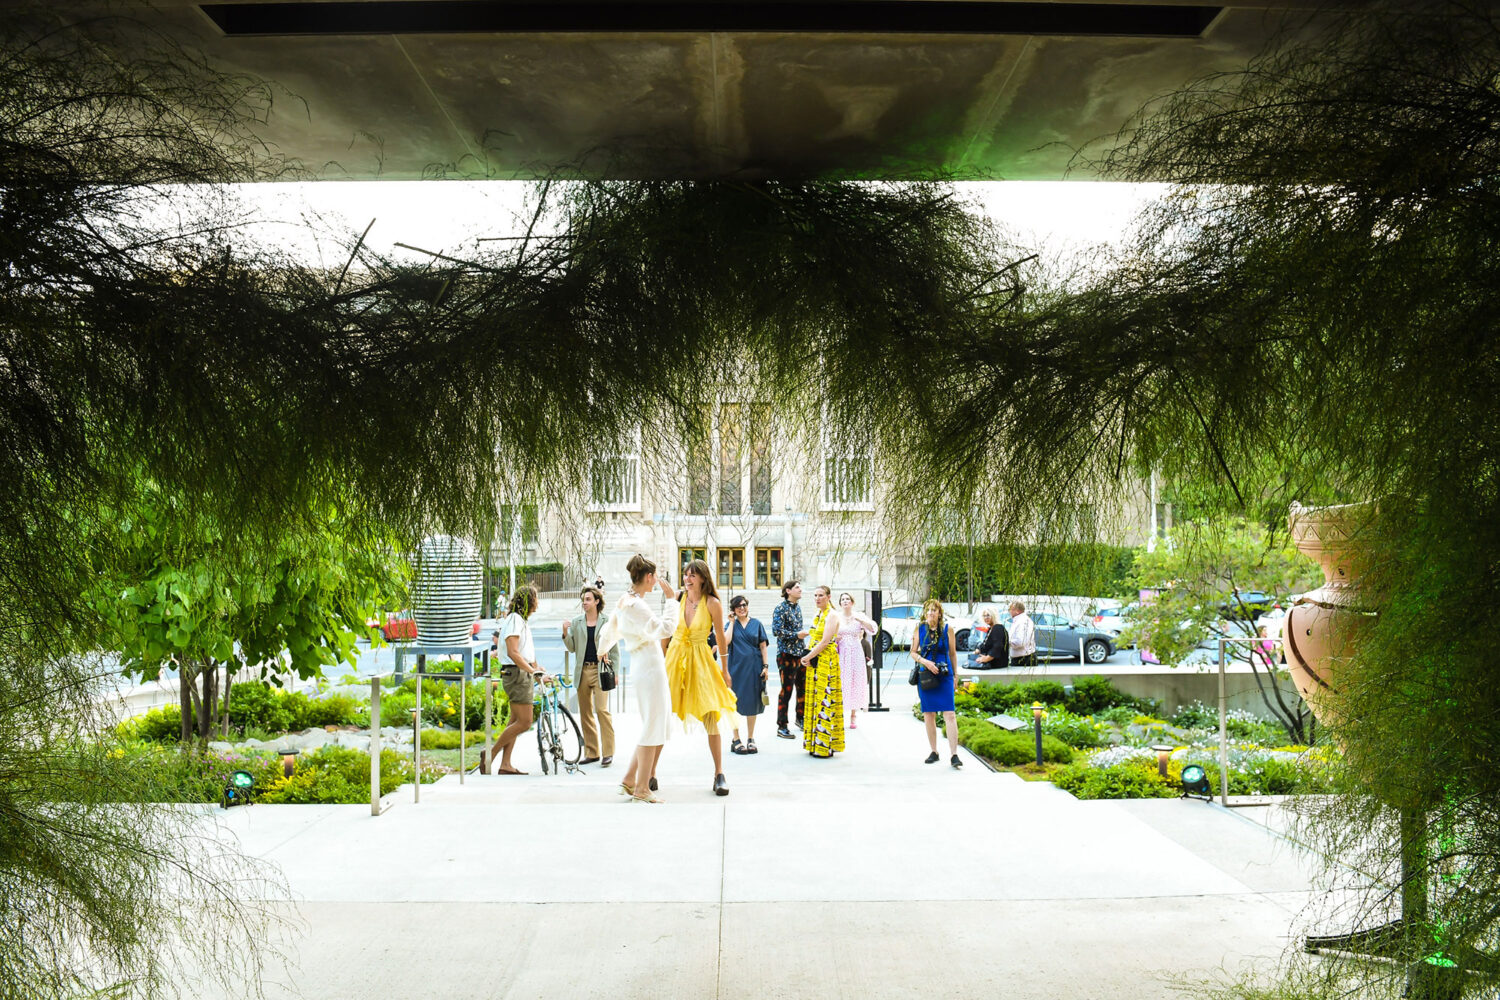 Guests is formal attire walking up the steps of the Gardiner which is draped with green plants